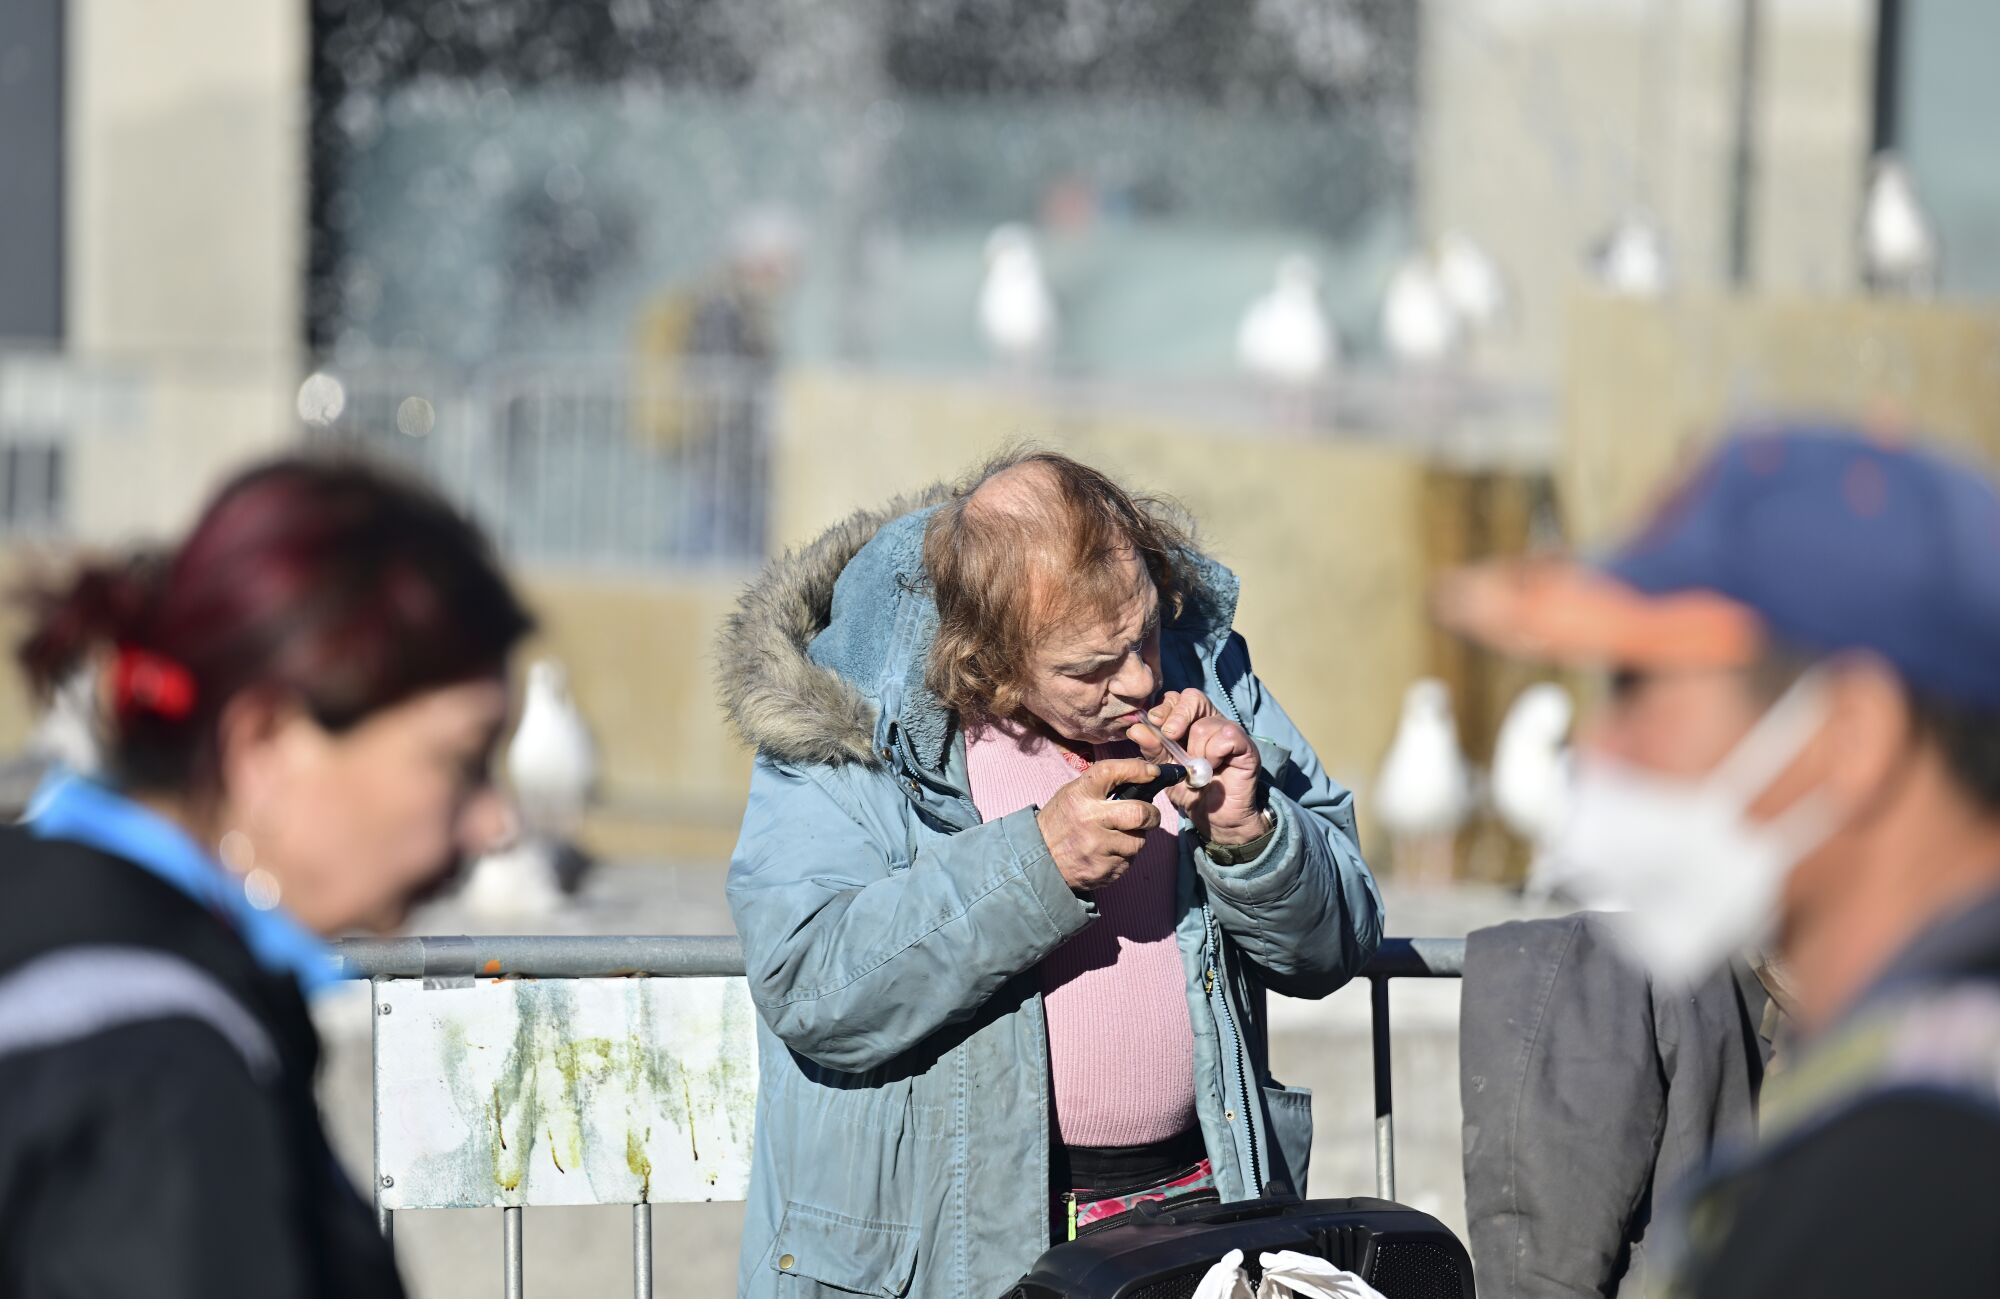 A person smokes an illegal substance at UN Plaza in San Francisco on Dec. 17.